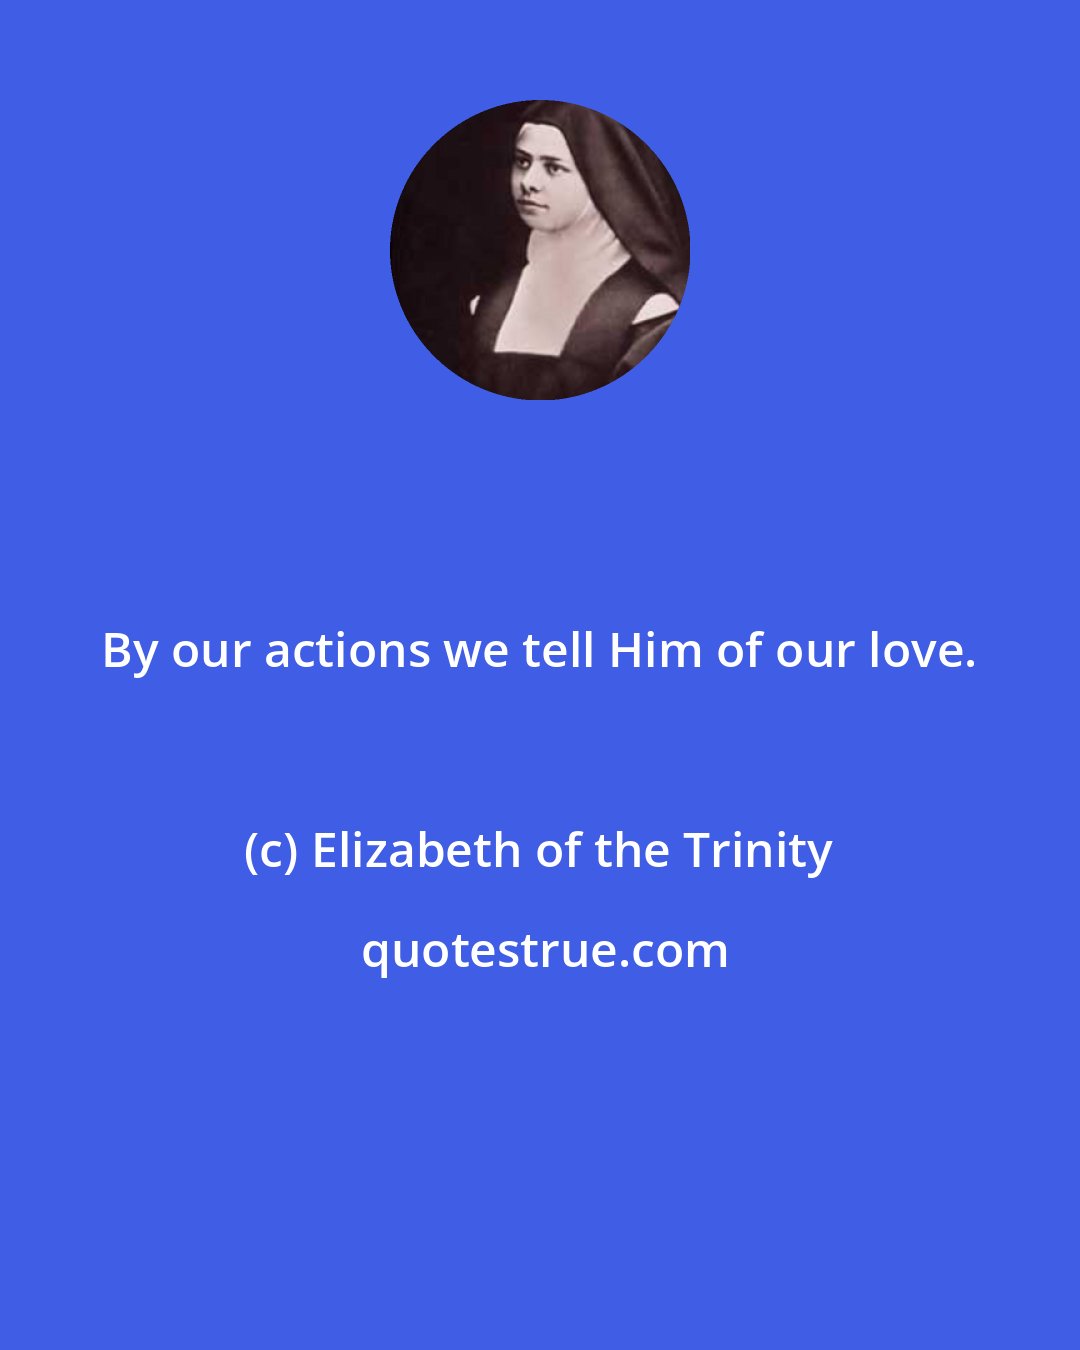 Elizabeth of the Trinity: By our actions we tell Him of our love.